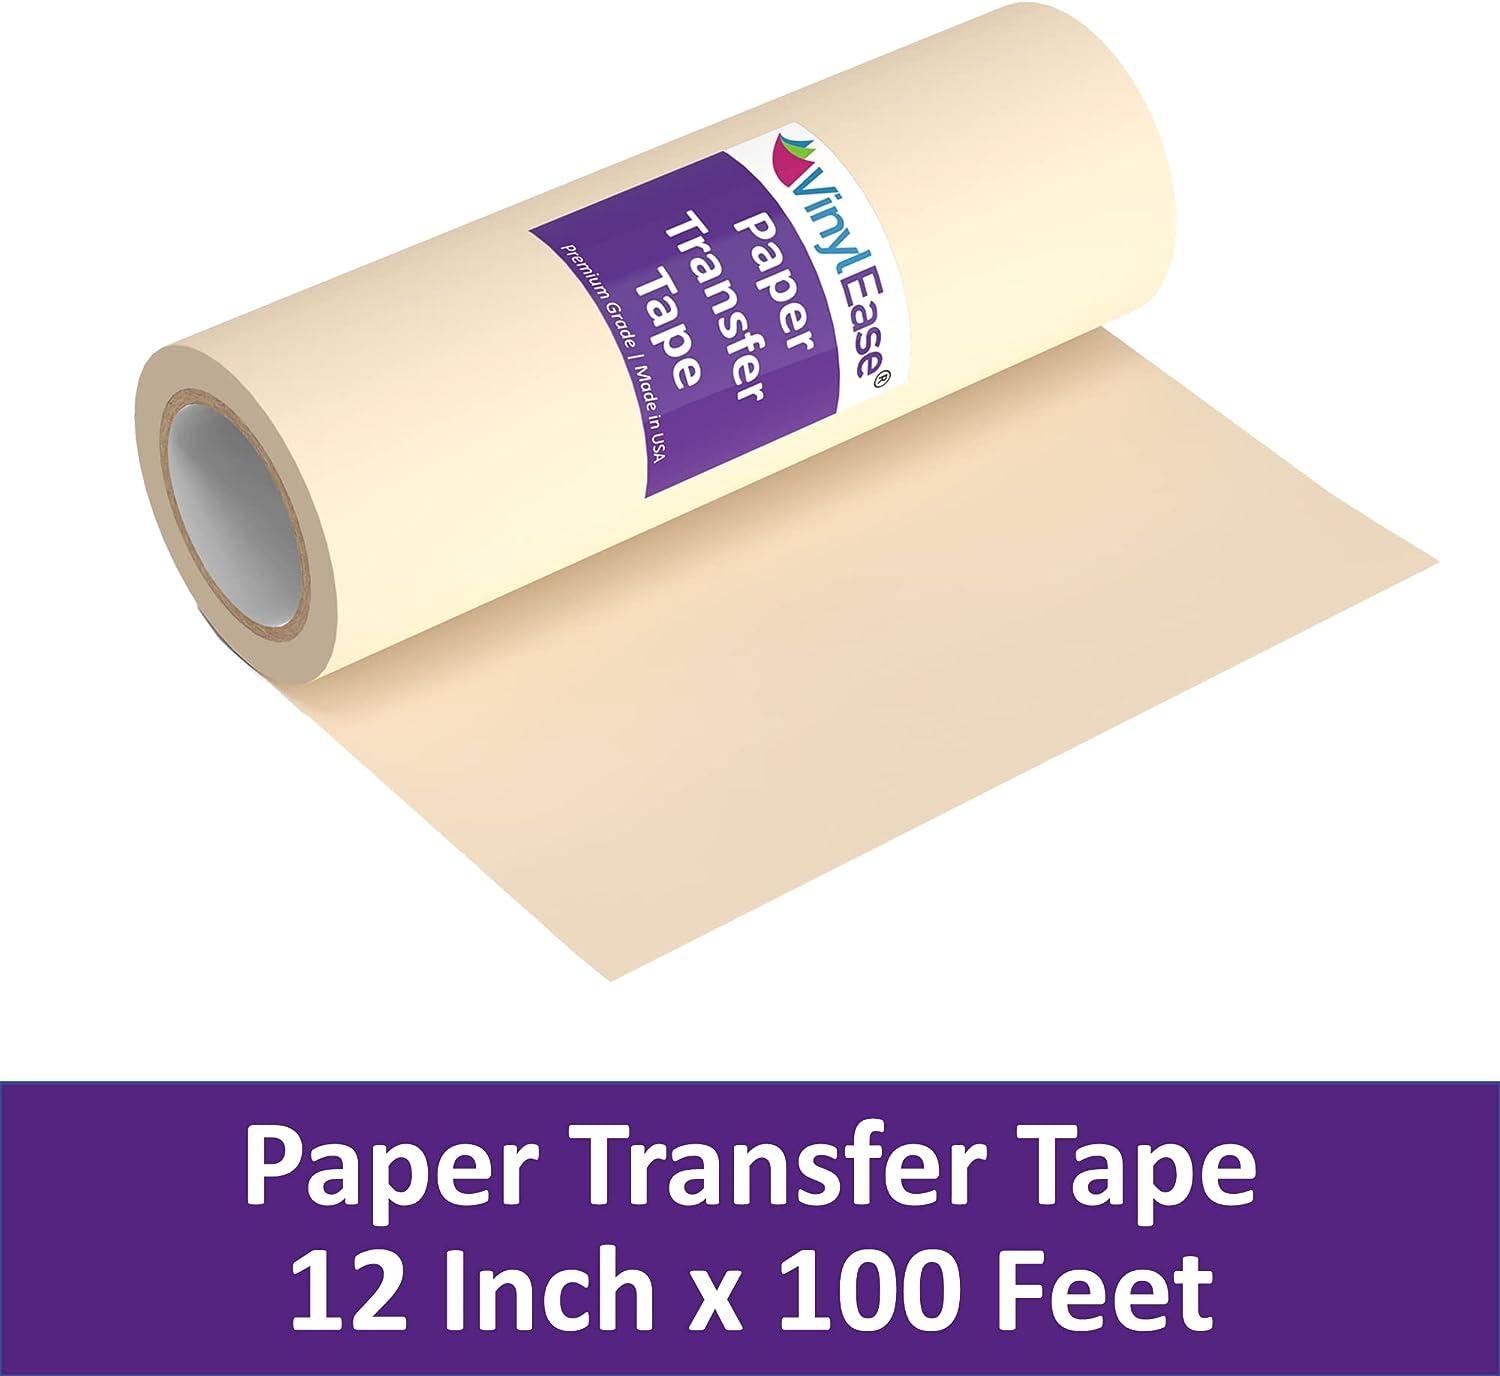 Vinyl Ease 12inch x 100 feet roll of Paper Transfer Tape with a